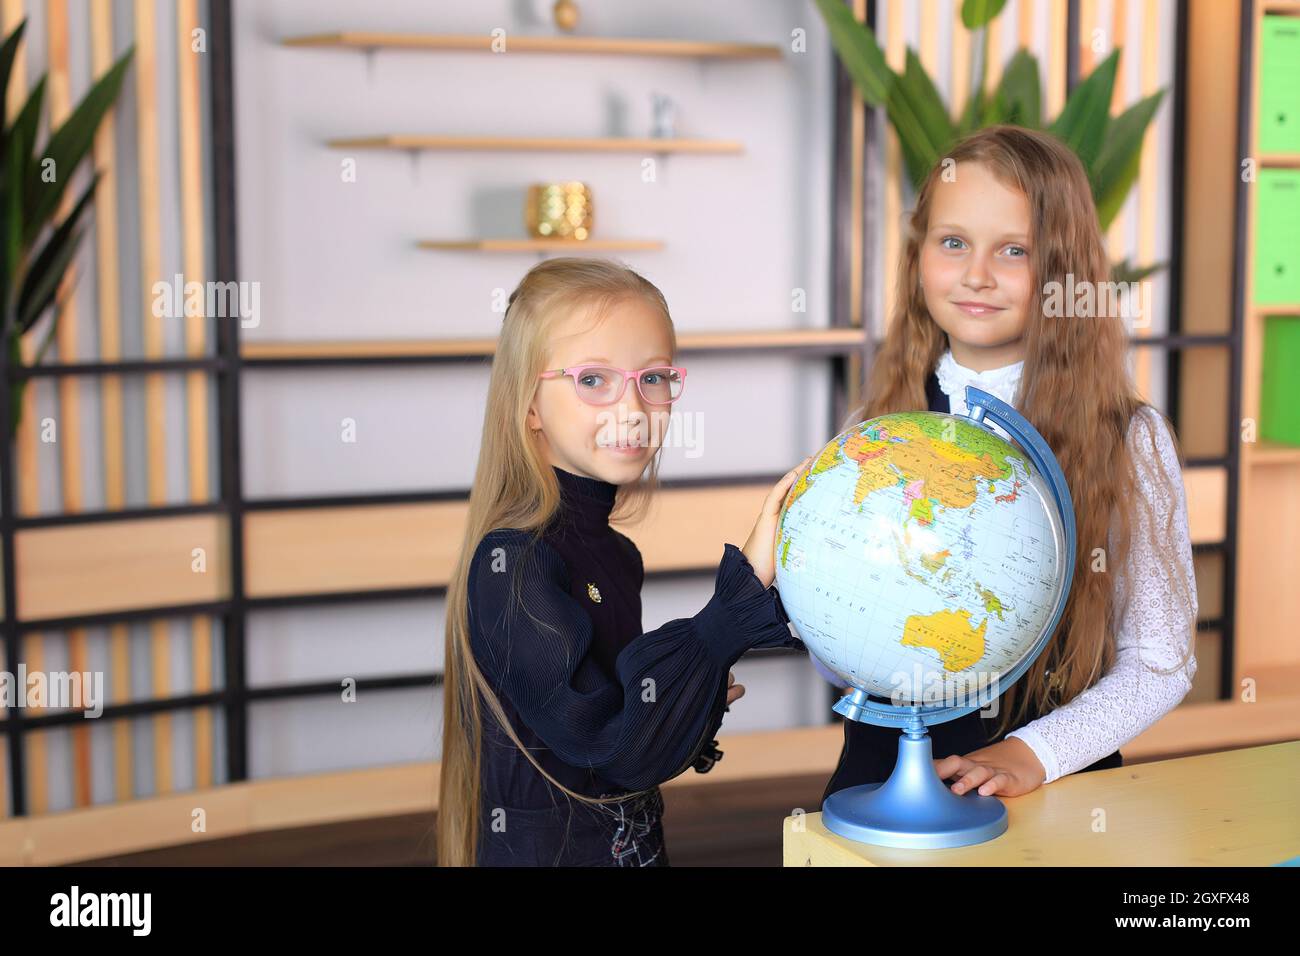 Children in school uniforms with a globe in the office. Girls in the school class. Portraits of schoolgirls in a geography lesson Stock Photo